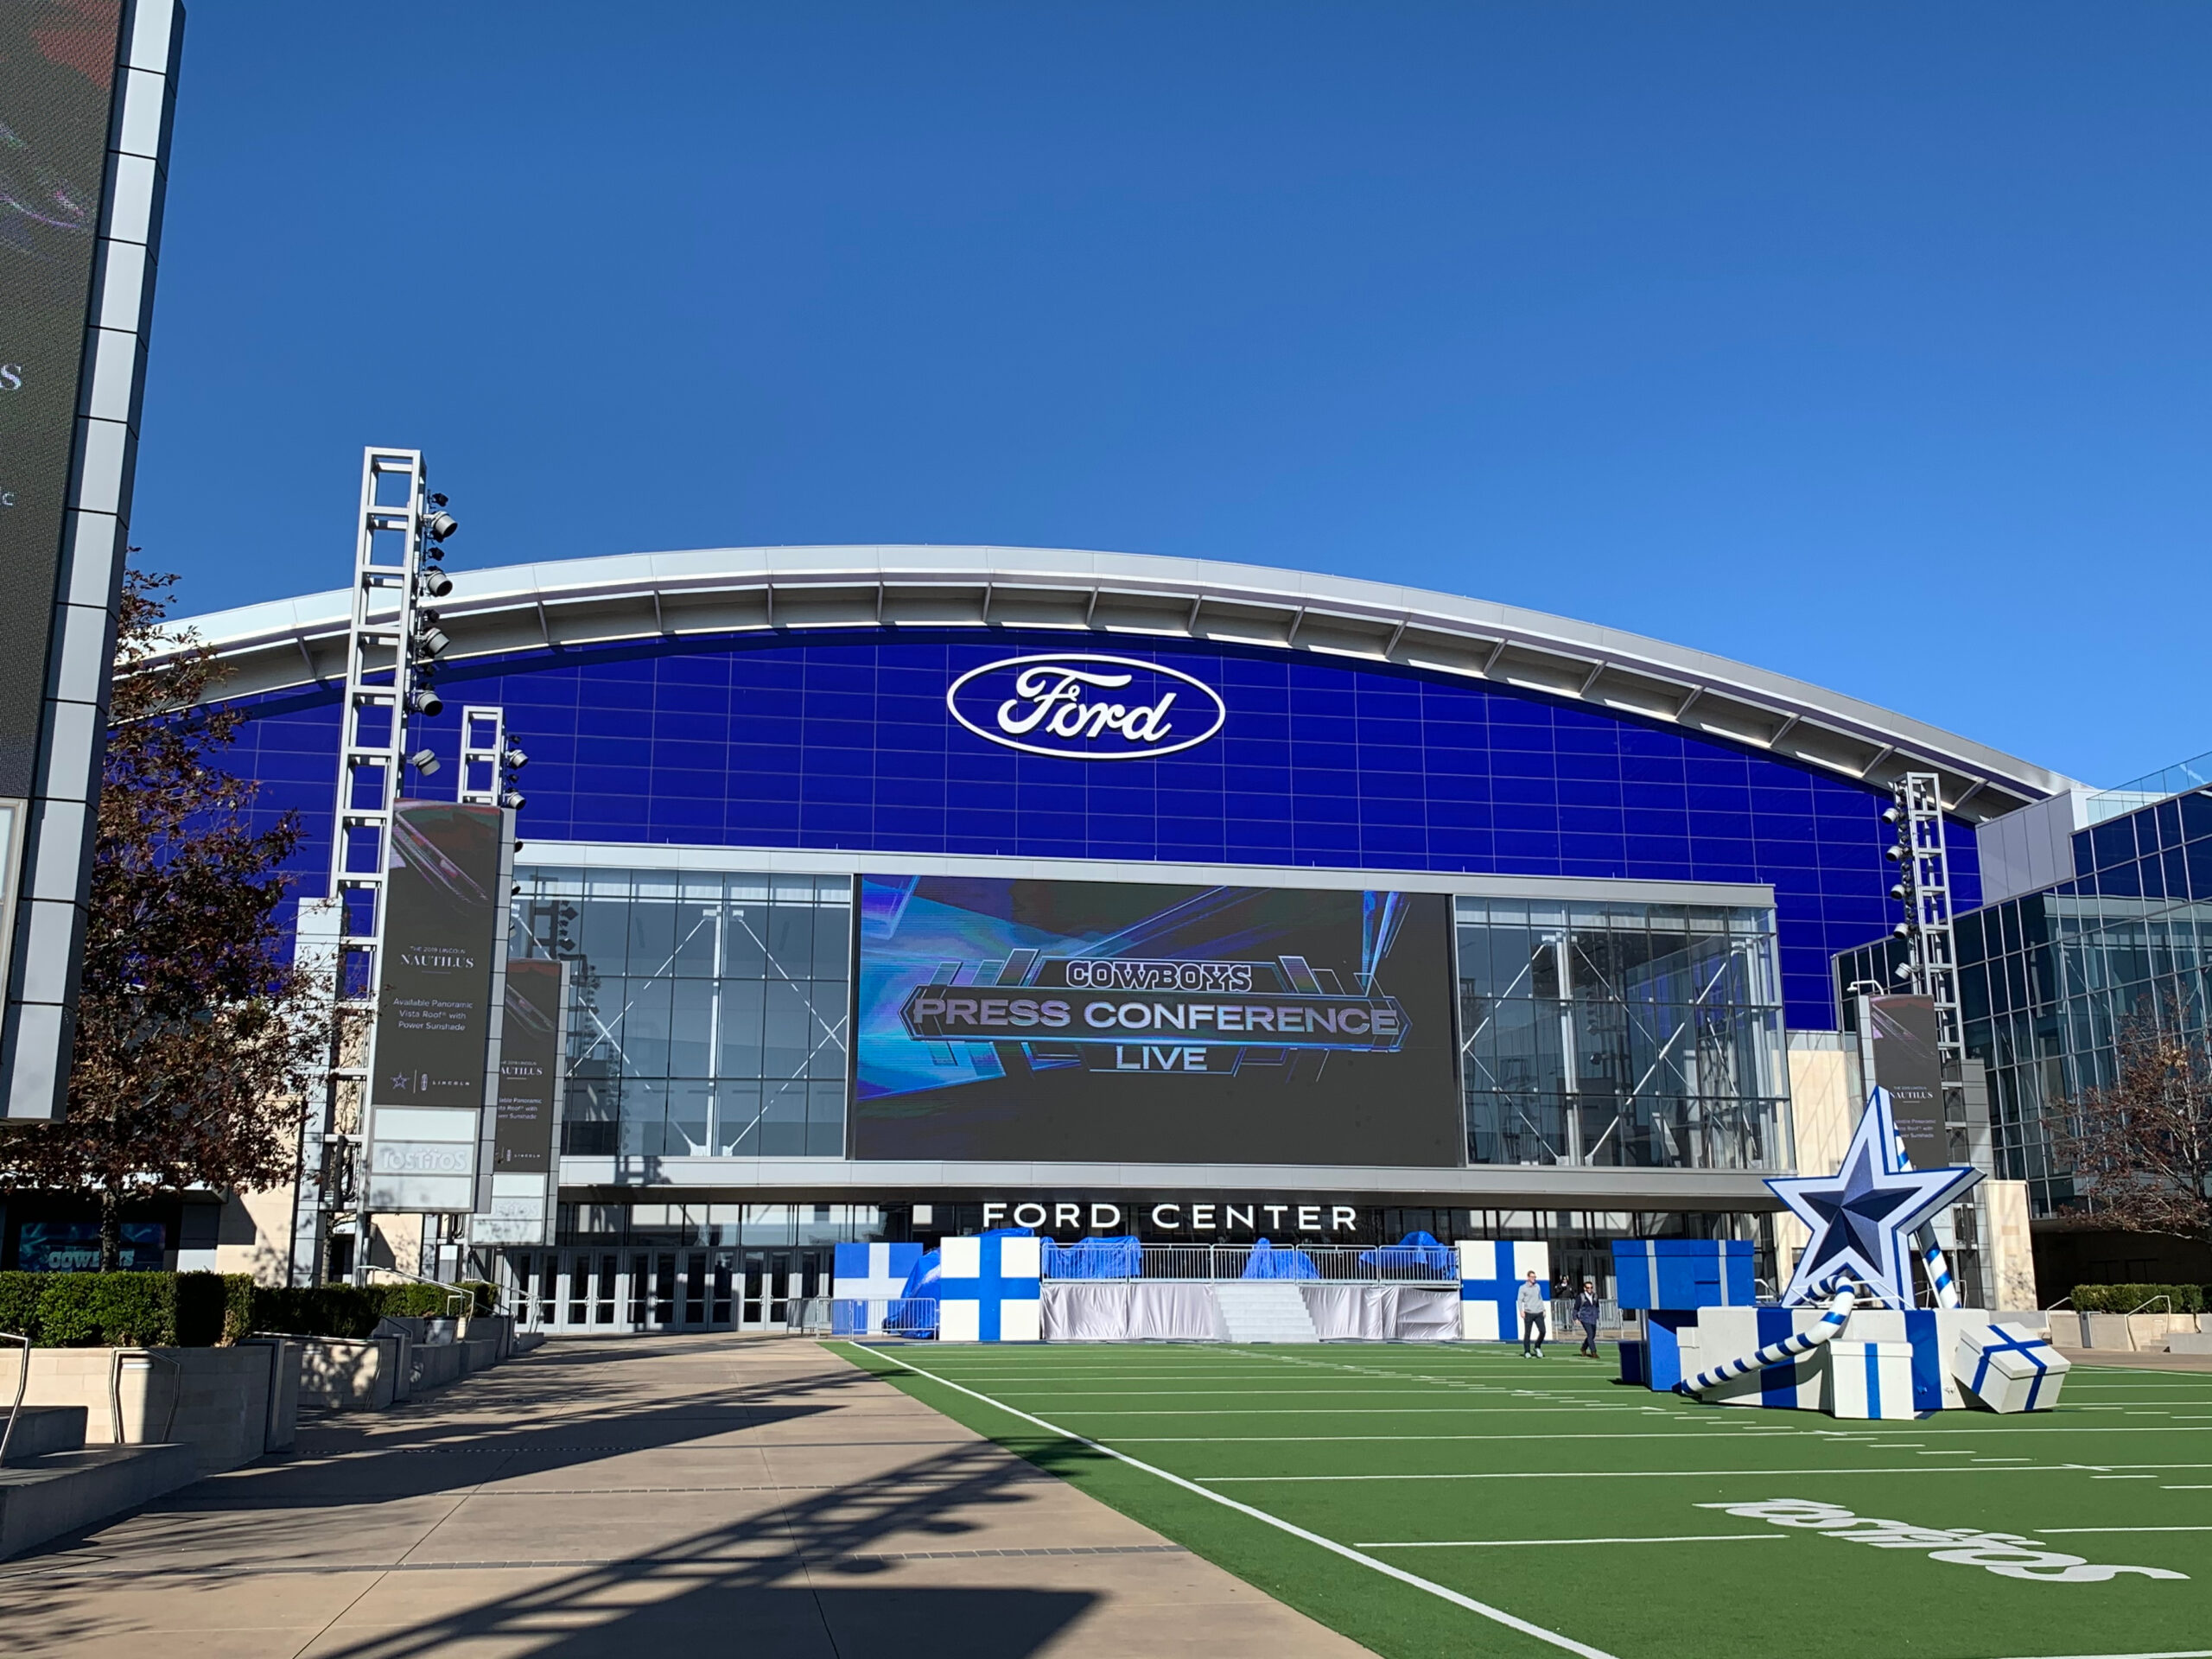 Exterior of the Ford Center, featuring a large glass facade with Ford branding, adjacent to a football-themed plaza under a clear blue sky, near top-rated divorce lawyers in Frisco.